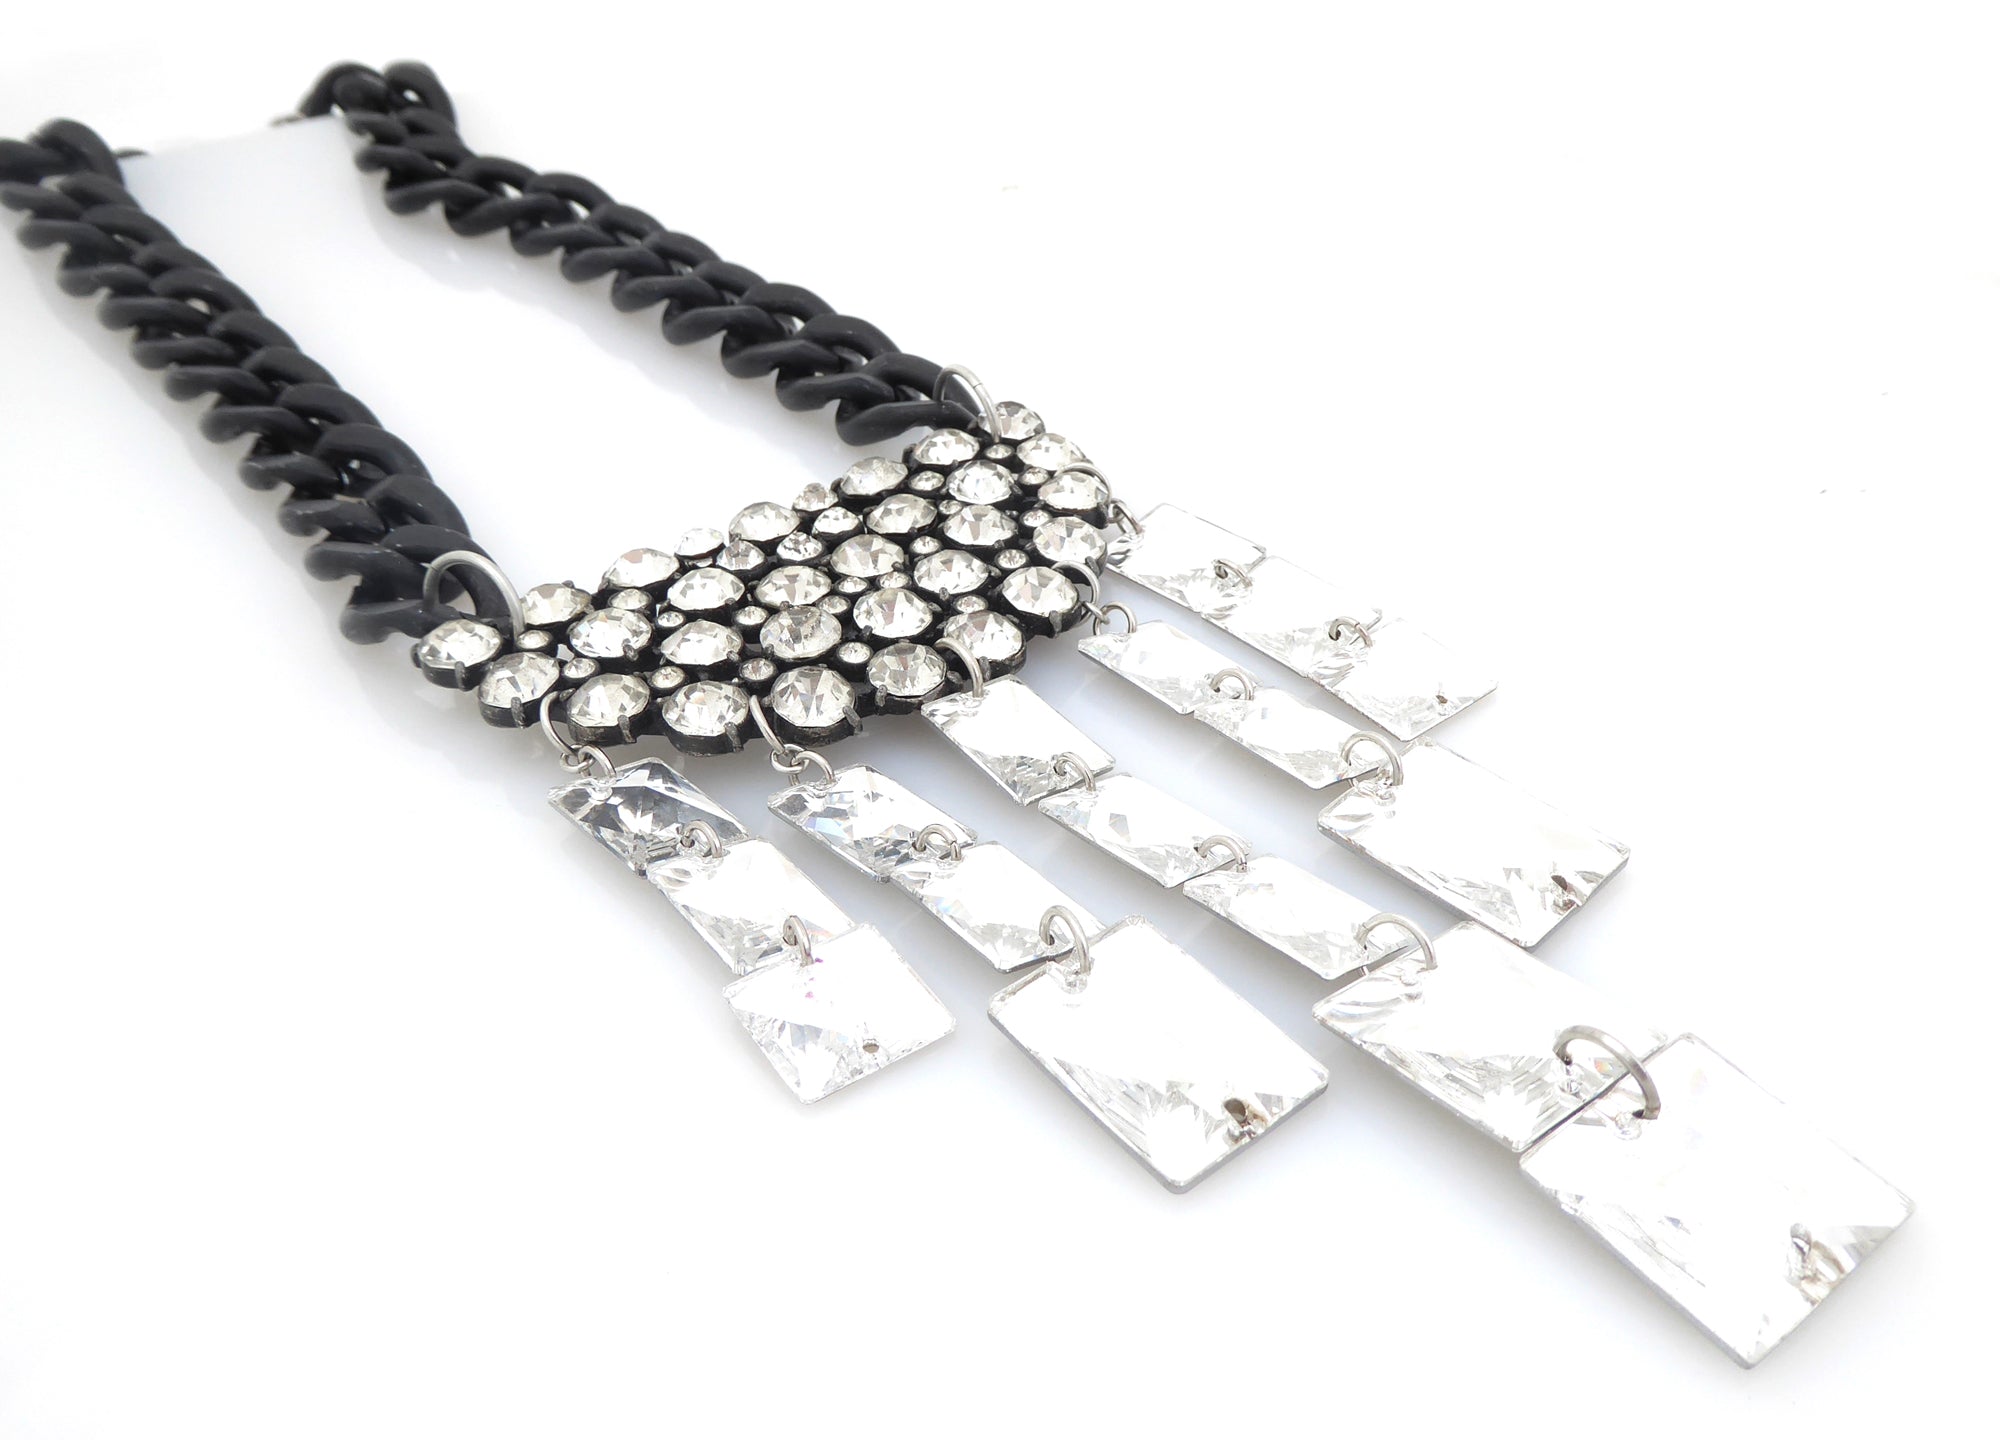 Rhinestone moon cluster necklace by Jenny Dayco 2